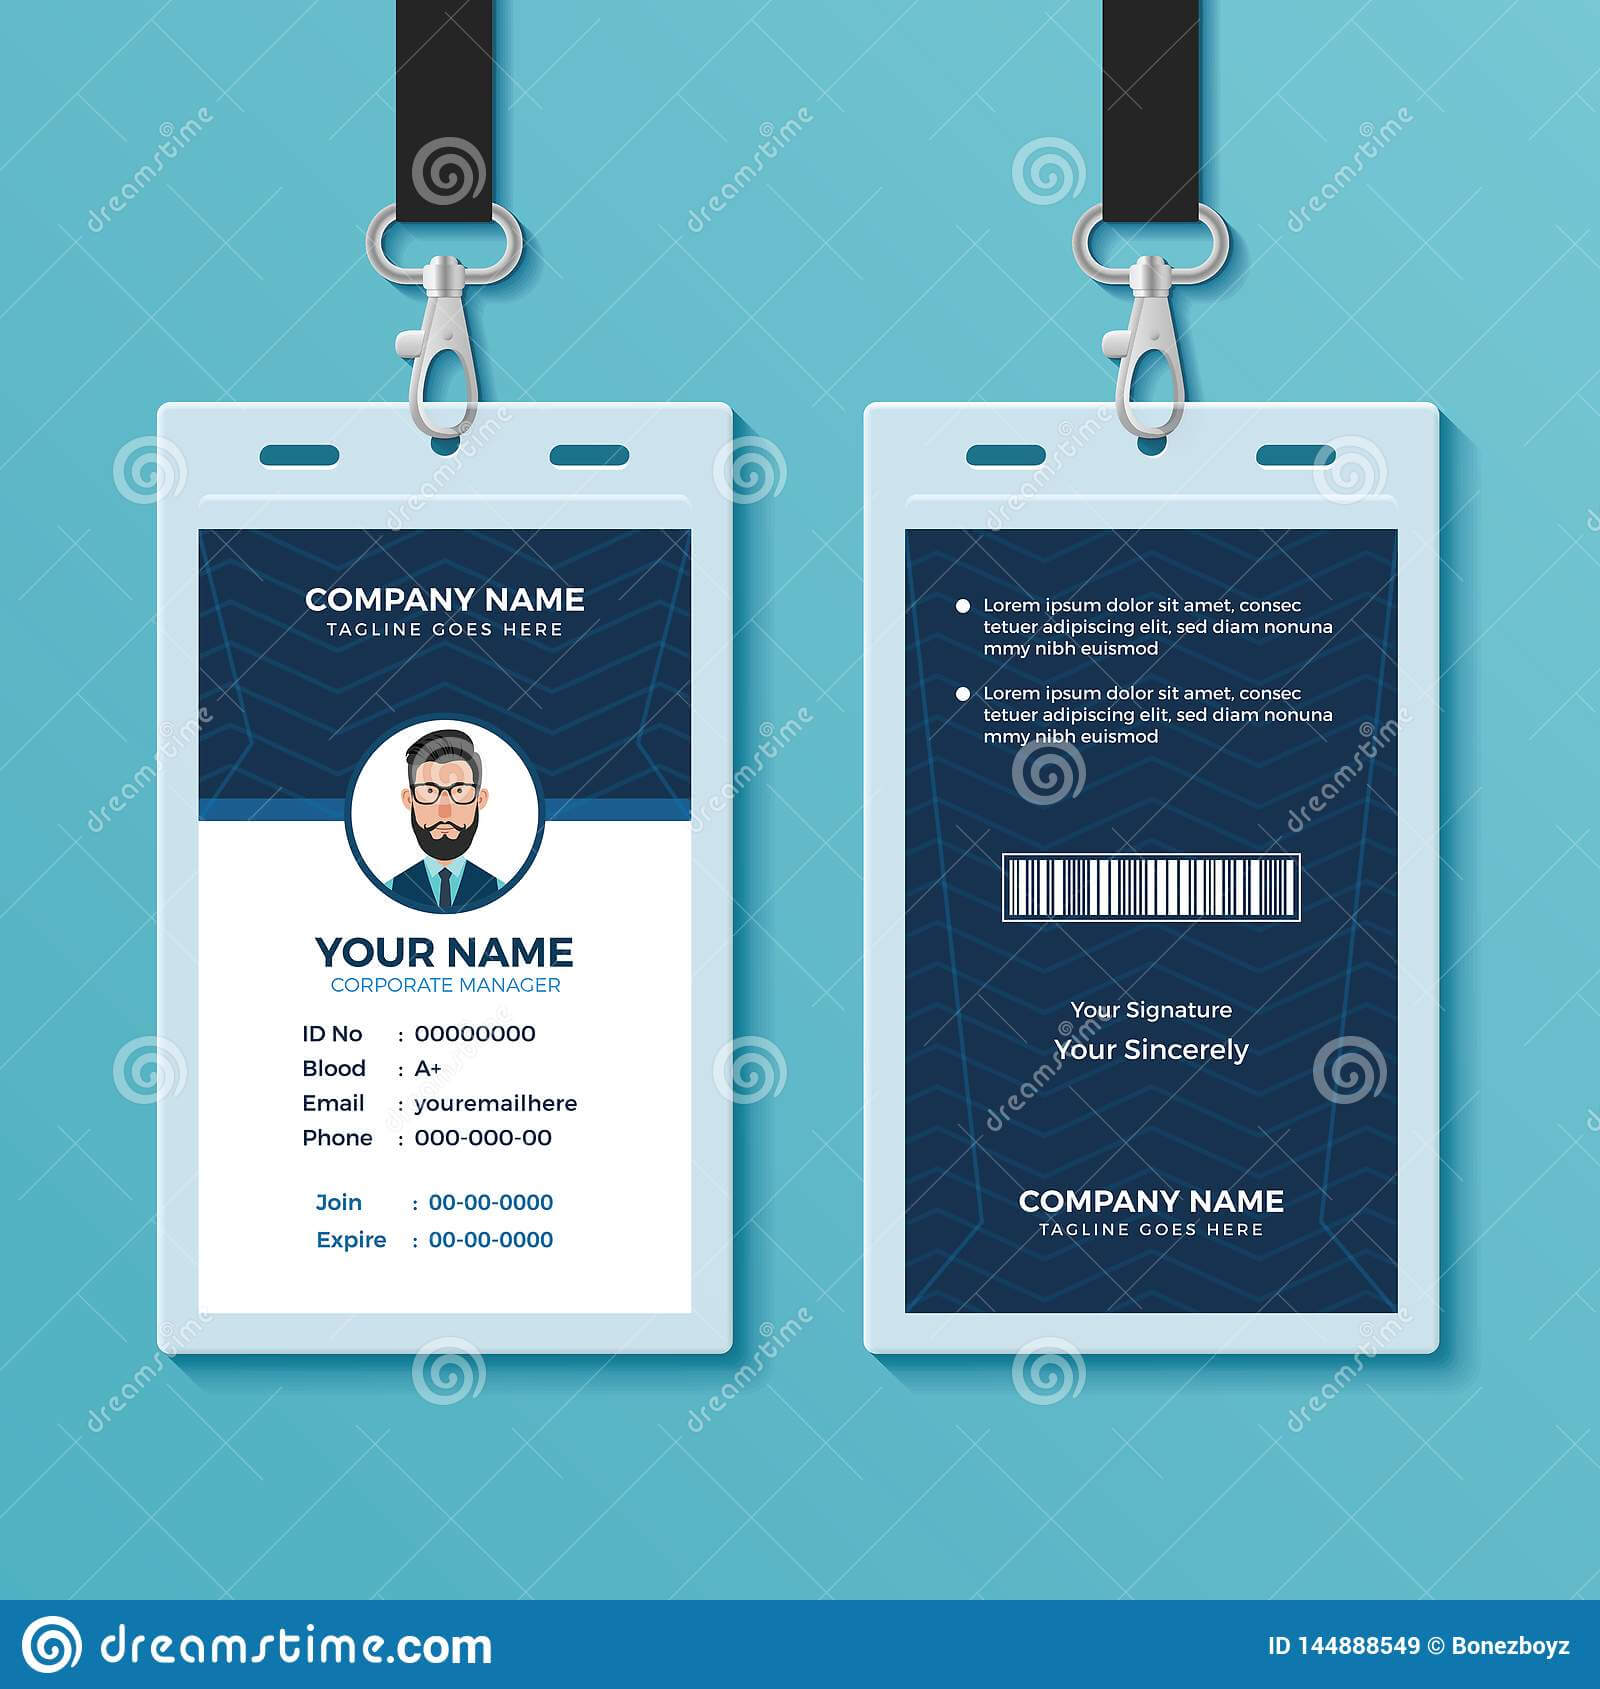 Modern And Clean Id Card Design Template Stock Vector Inside Company Id Card Design Template